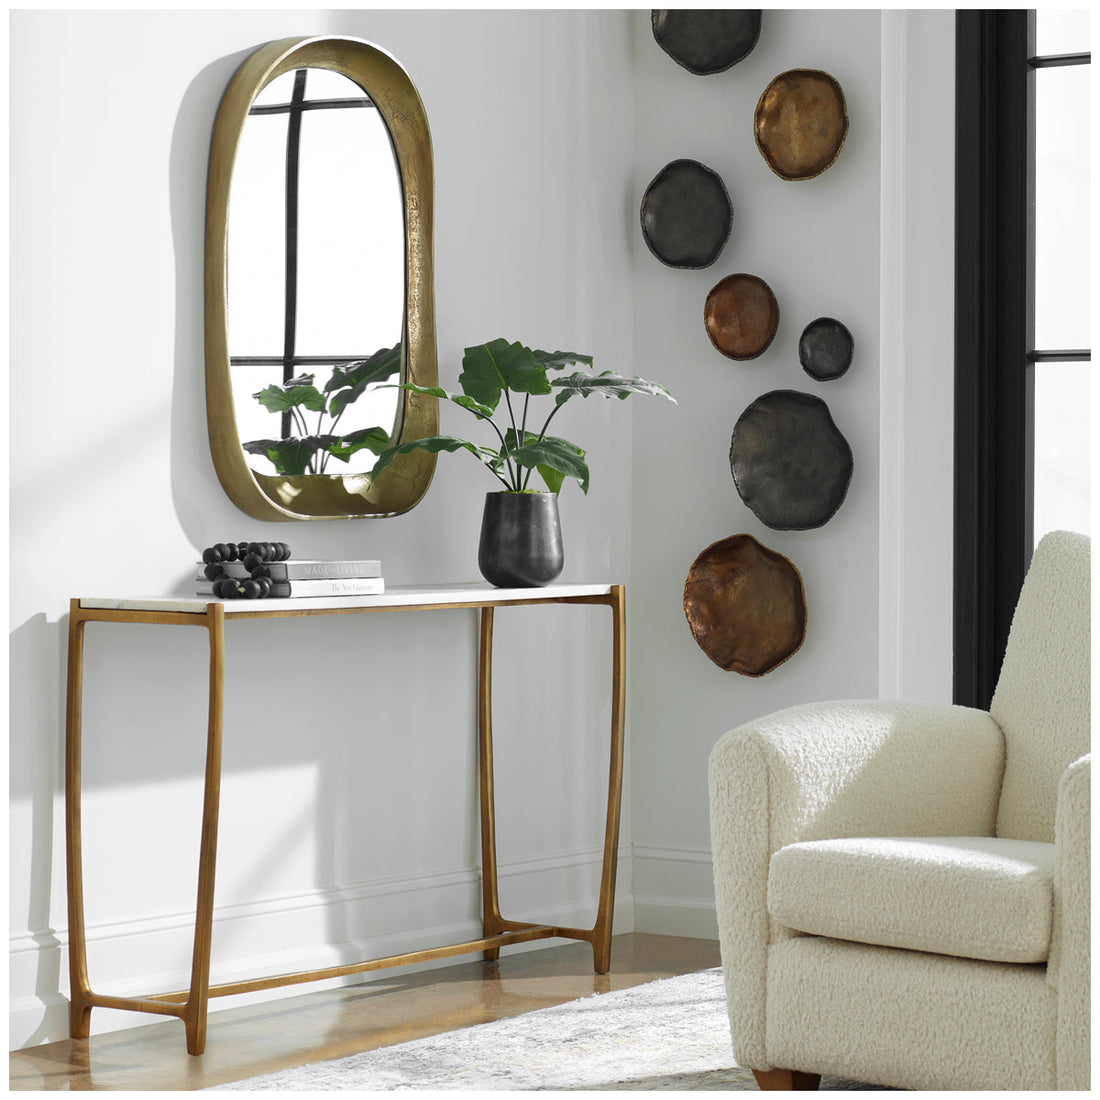 Uttermost Affinity White Marble Console Table